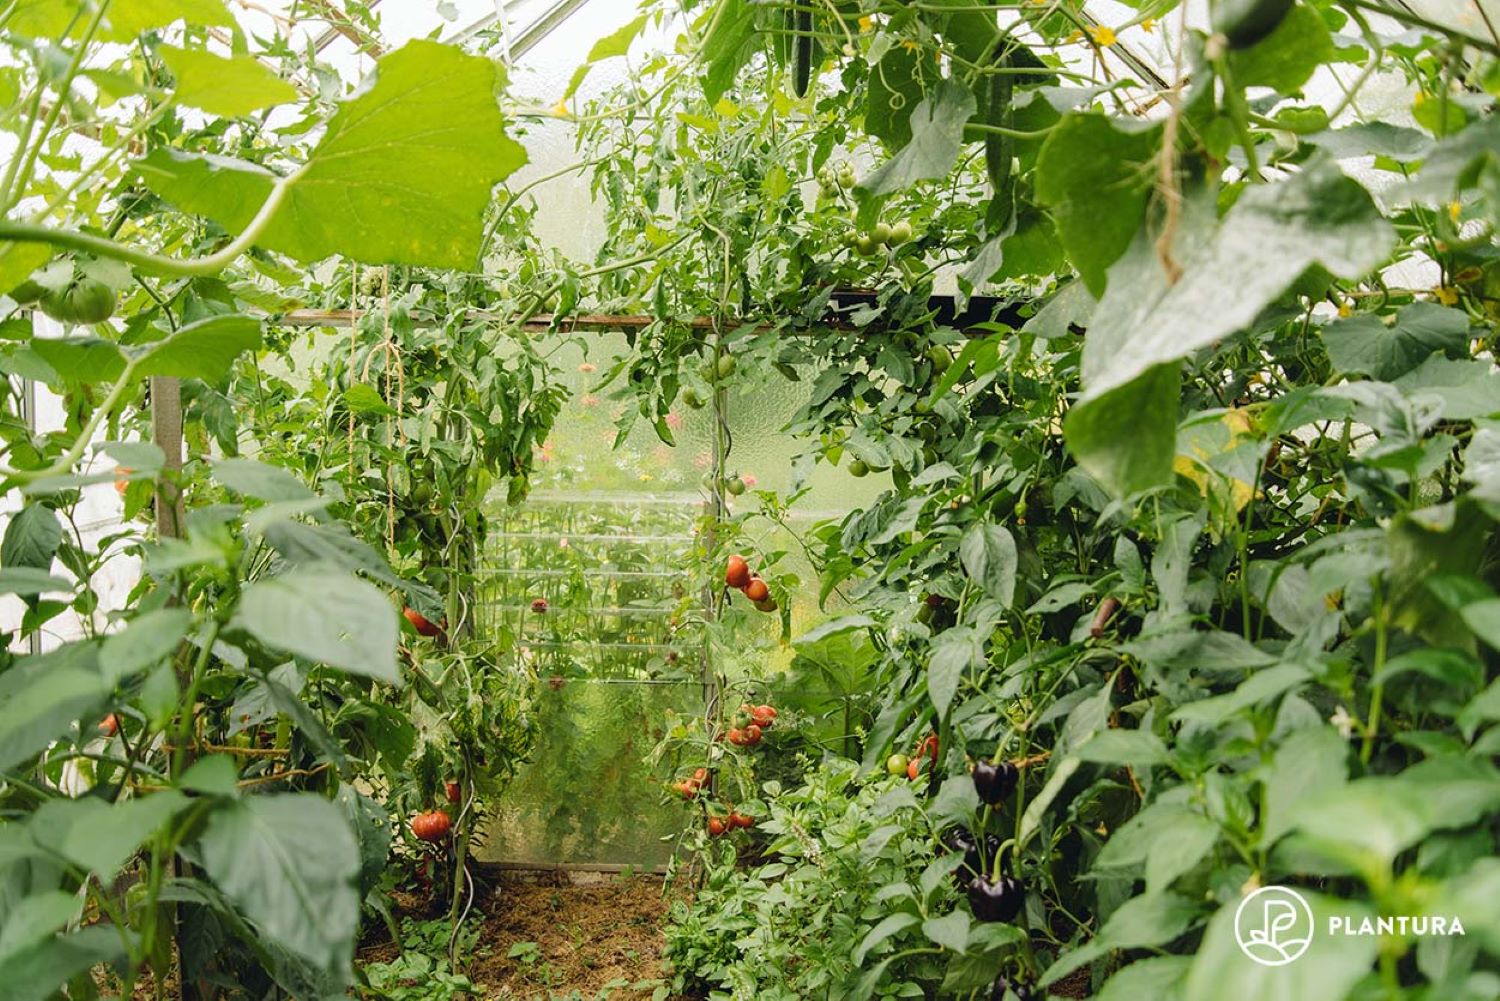 Image of A row of pepper plants and tomato plants growing in a greenhouse